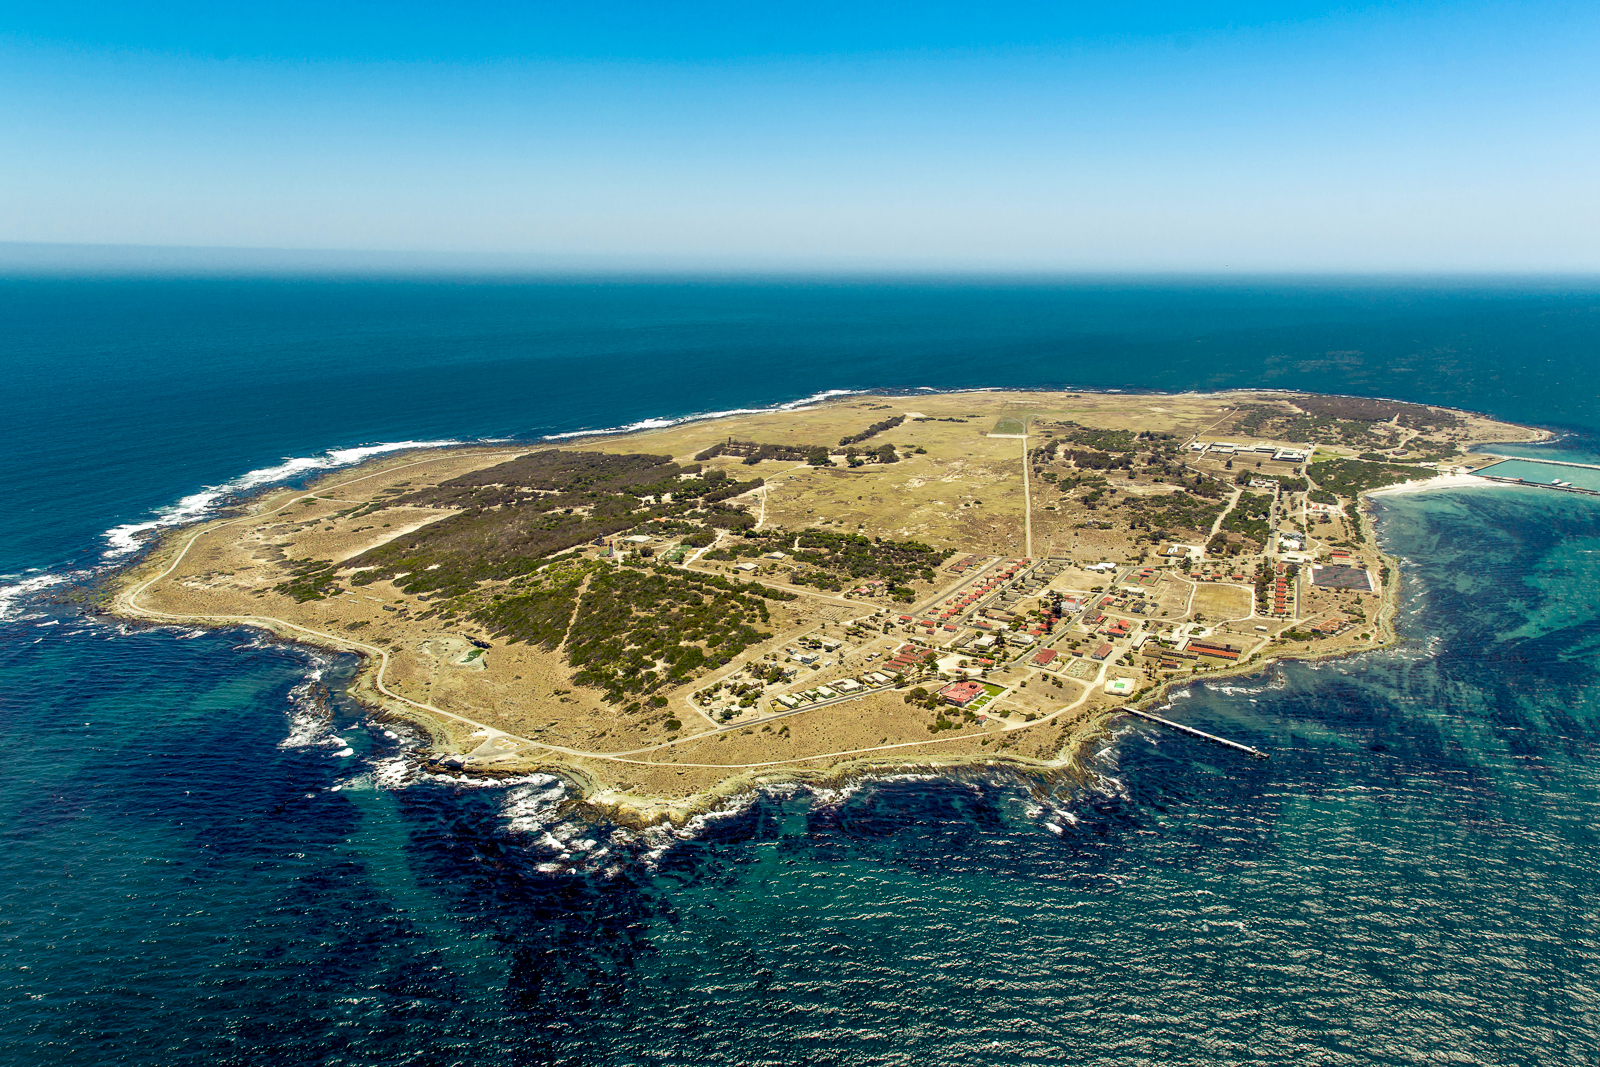 Aerial view of Robben Island off the coast of Cape Town